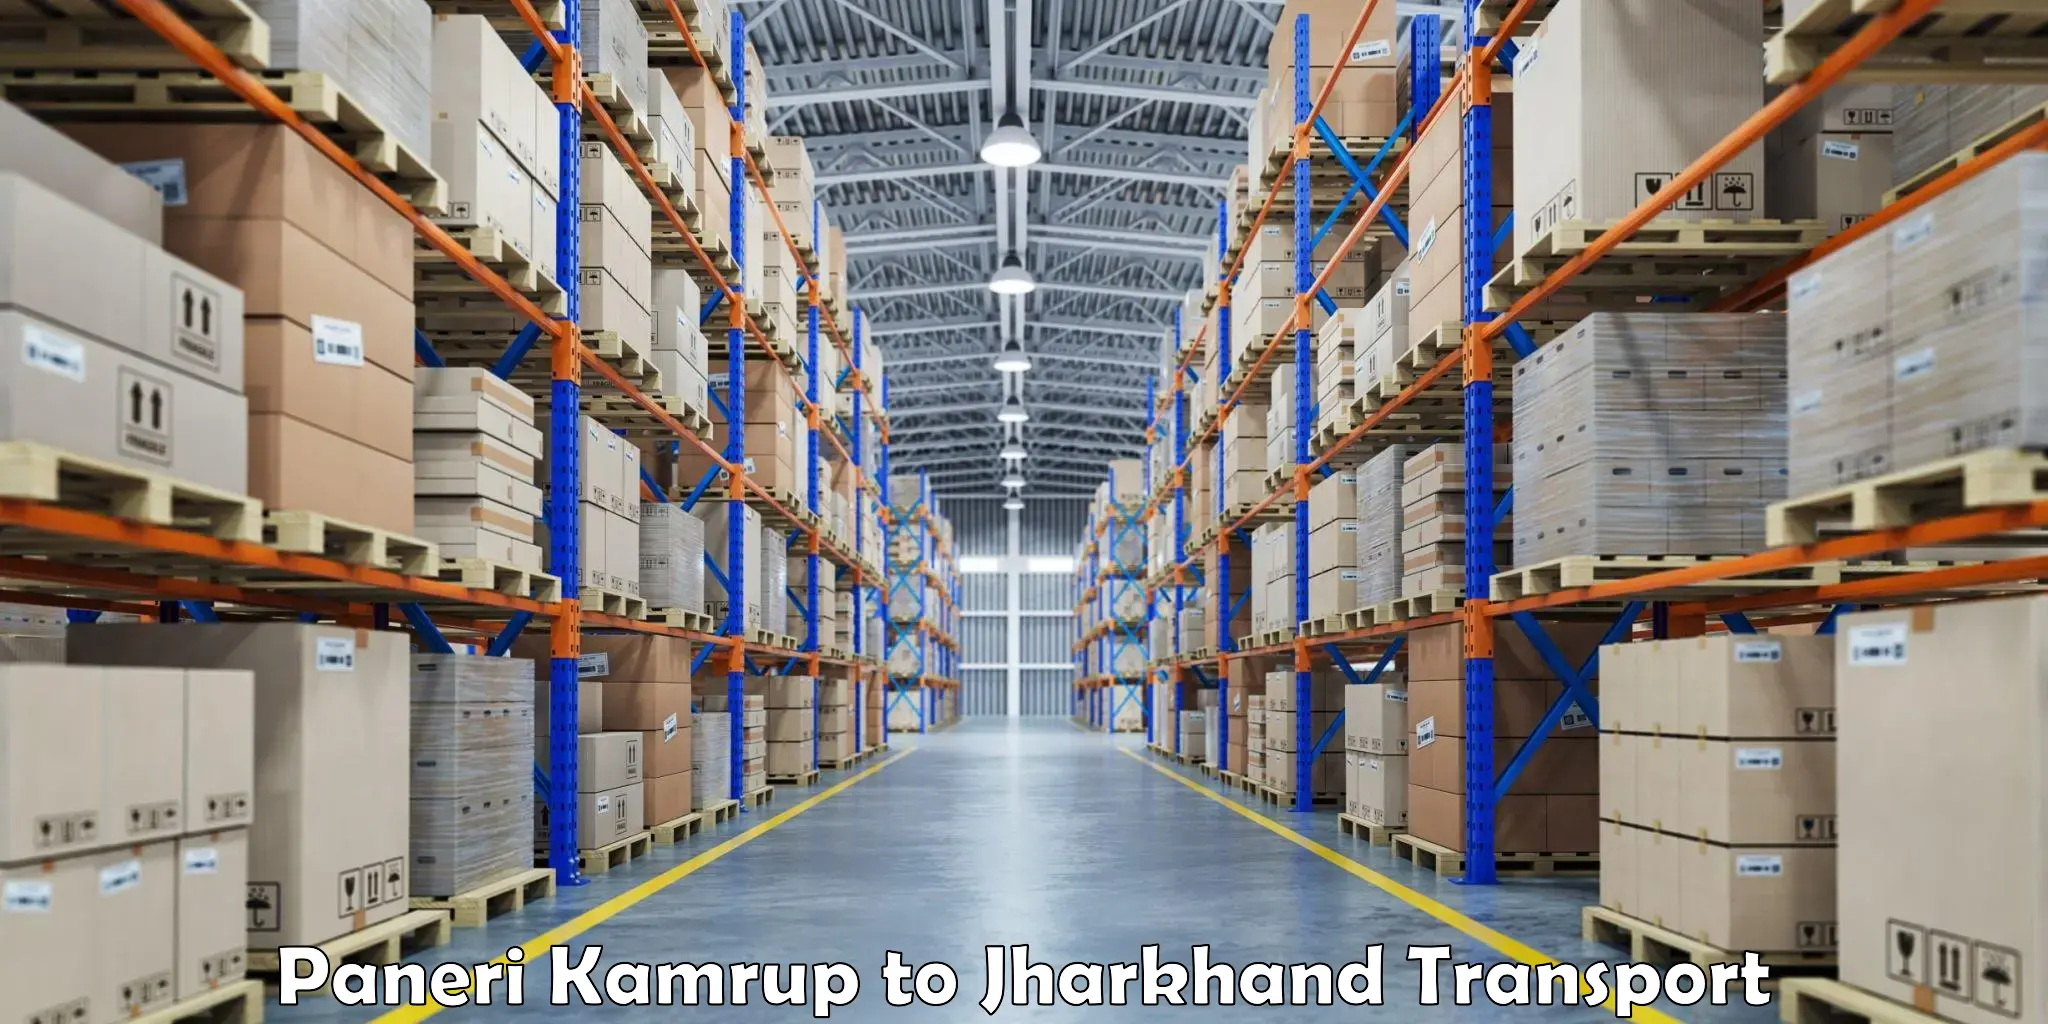 Part load transport service in India Paneri Kamrup to Dhanbad